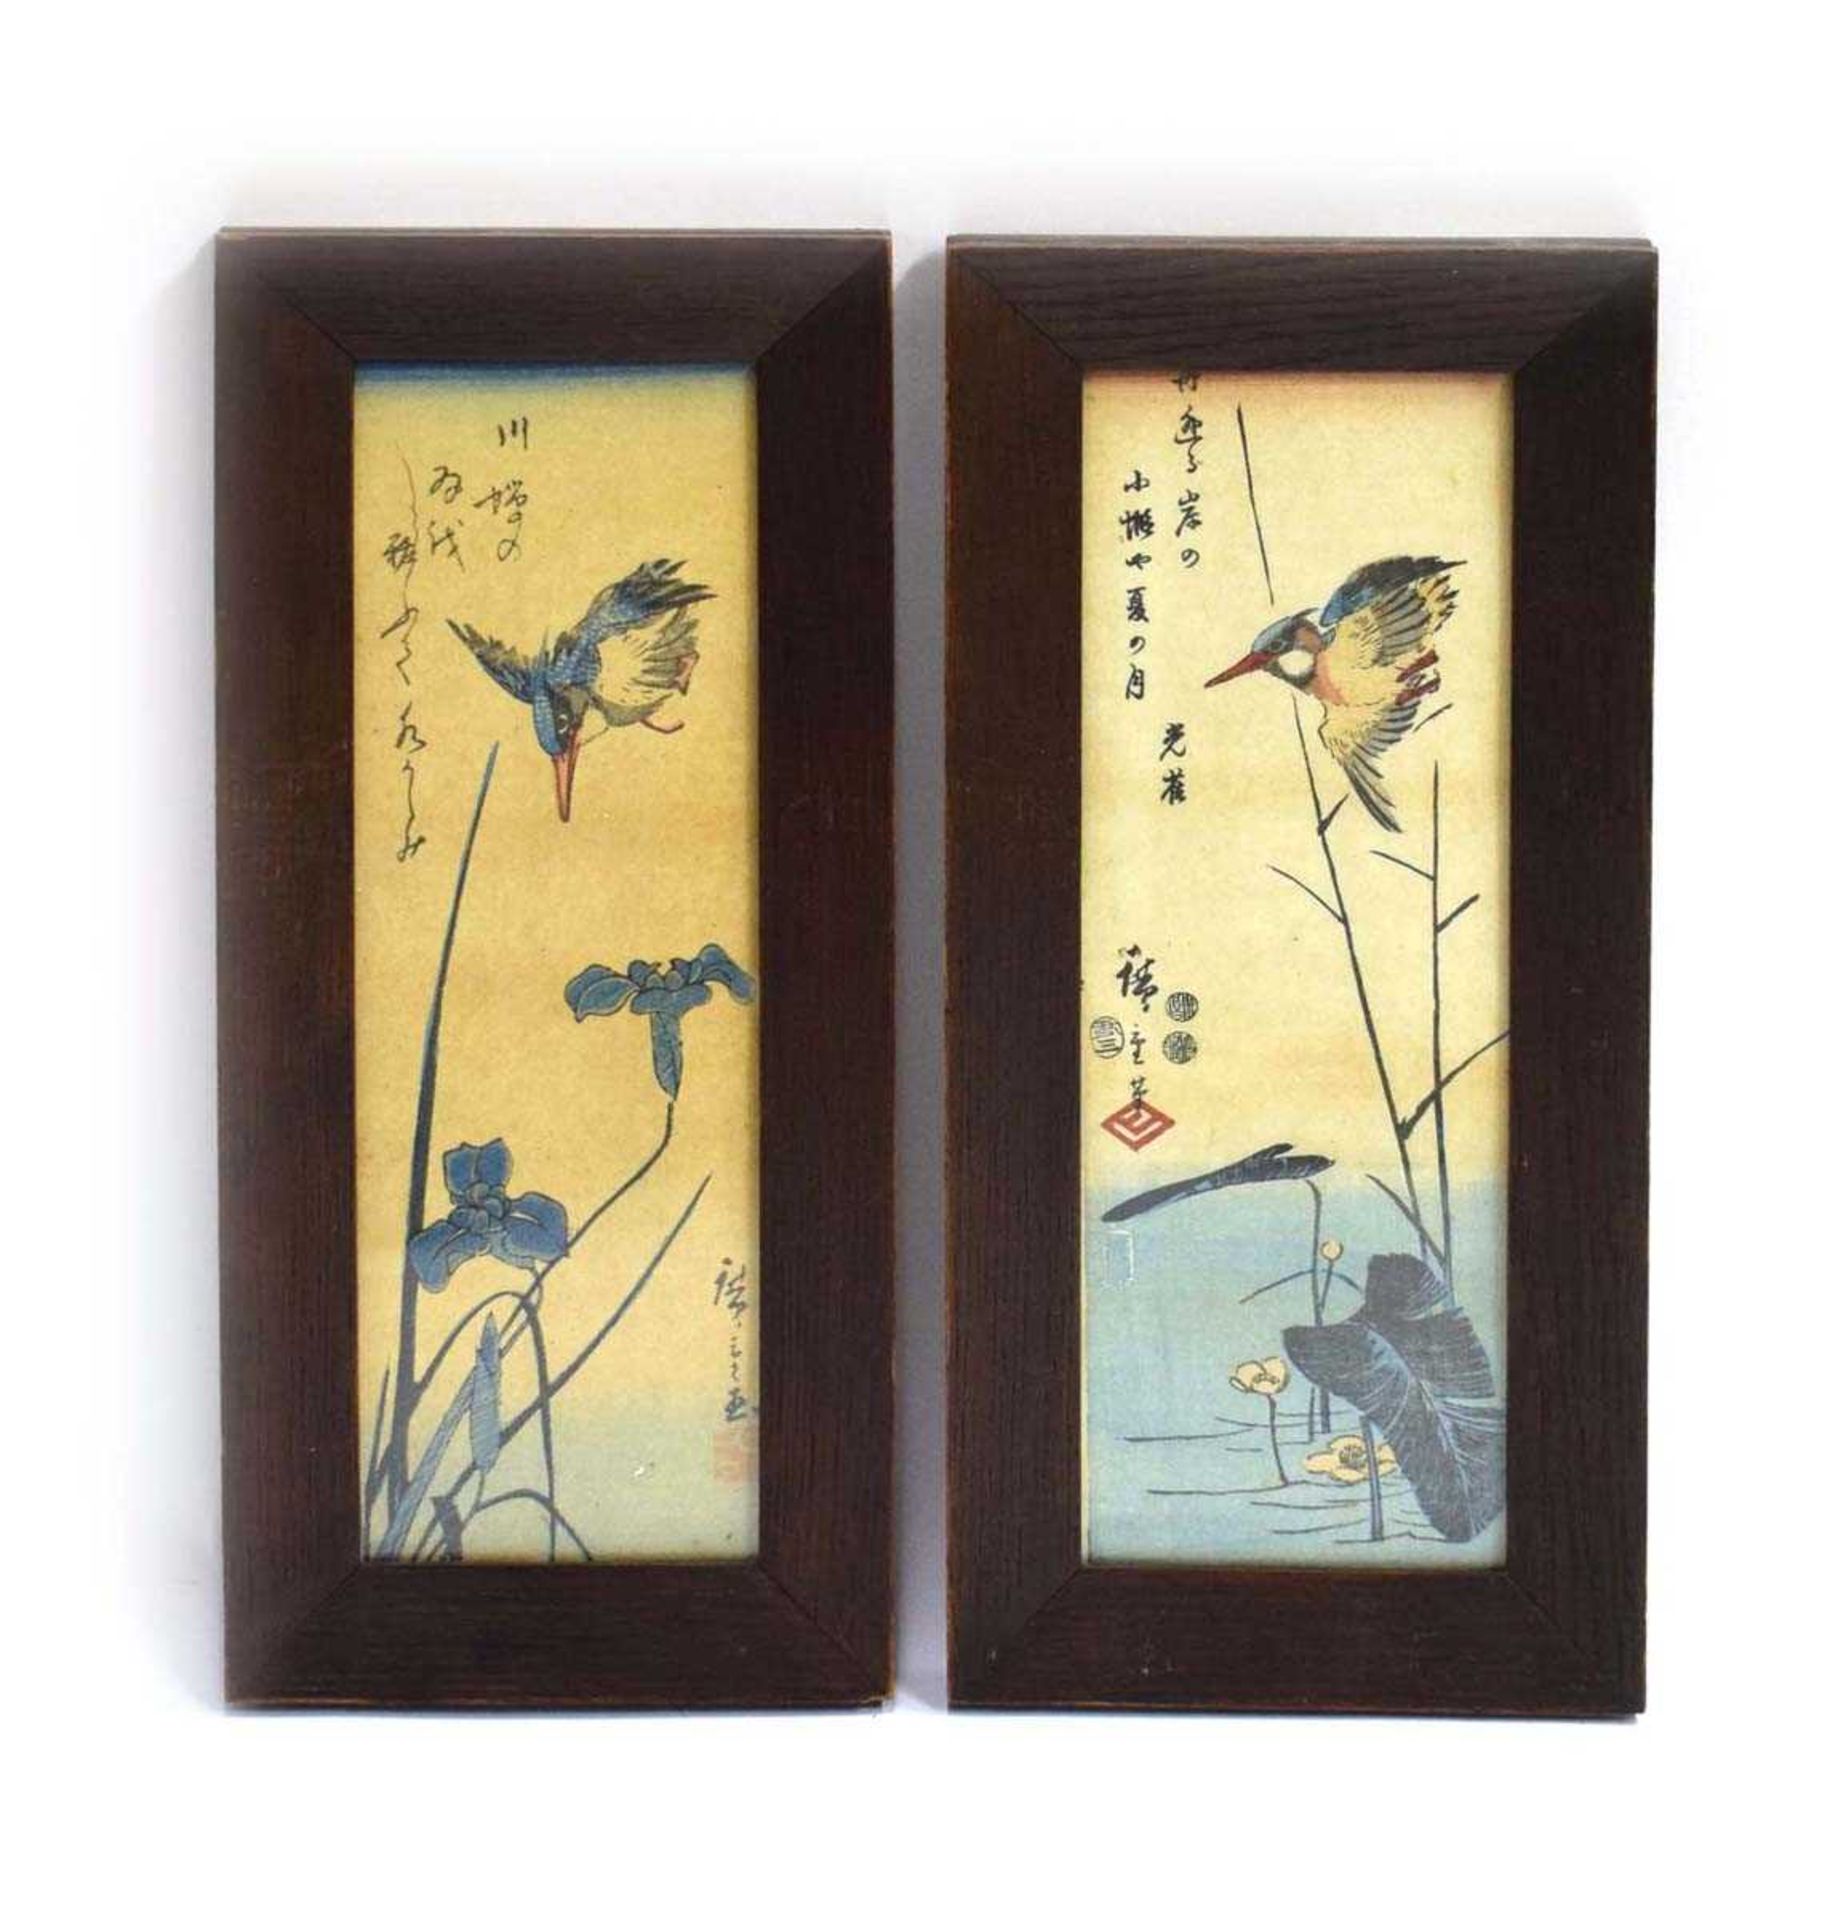 A pair of Japanese woodbock prints, each depicting a kingfisher in flight, 32 x 11 cm (2) *from